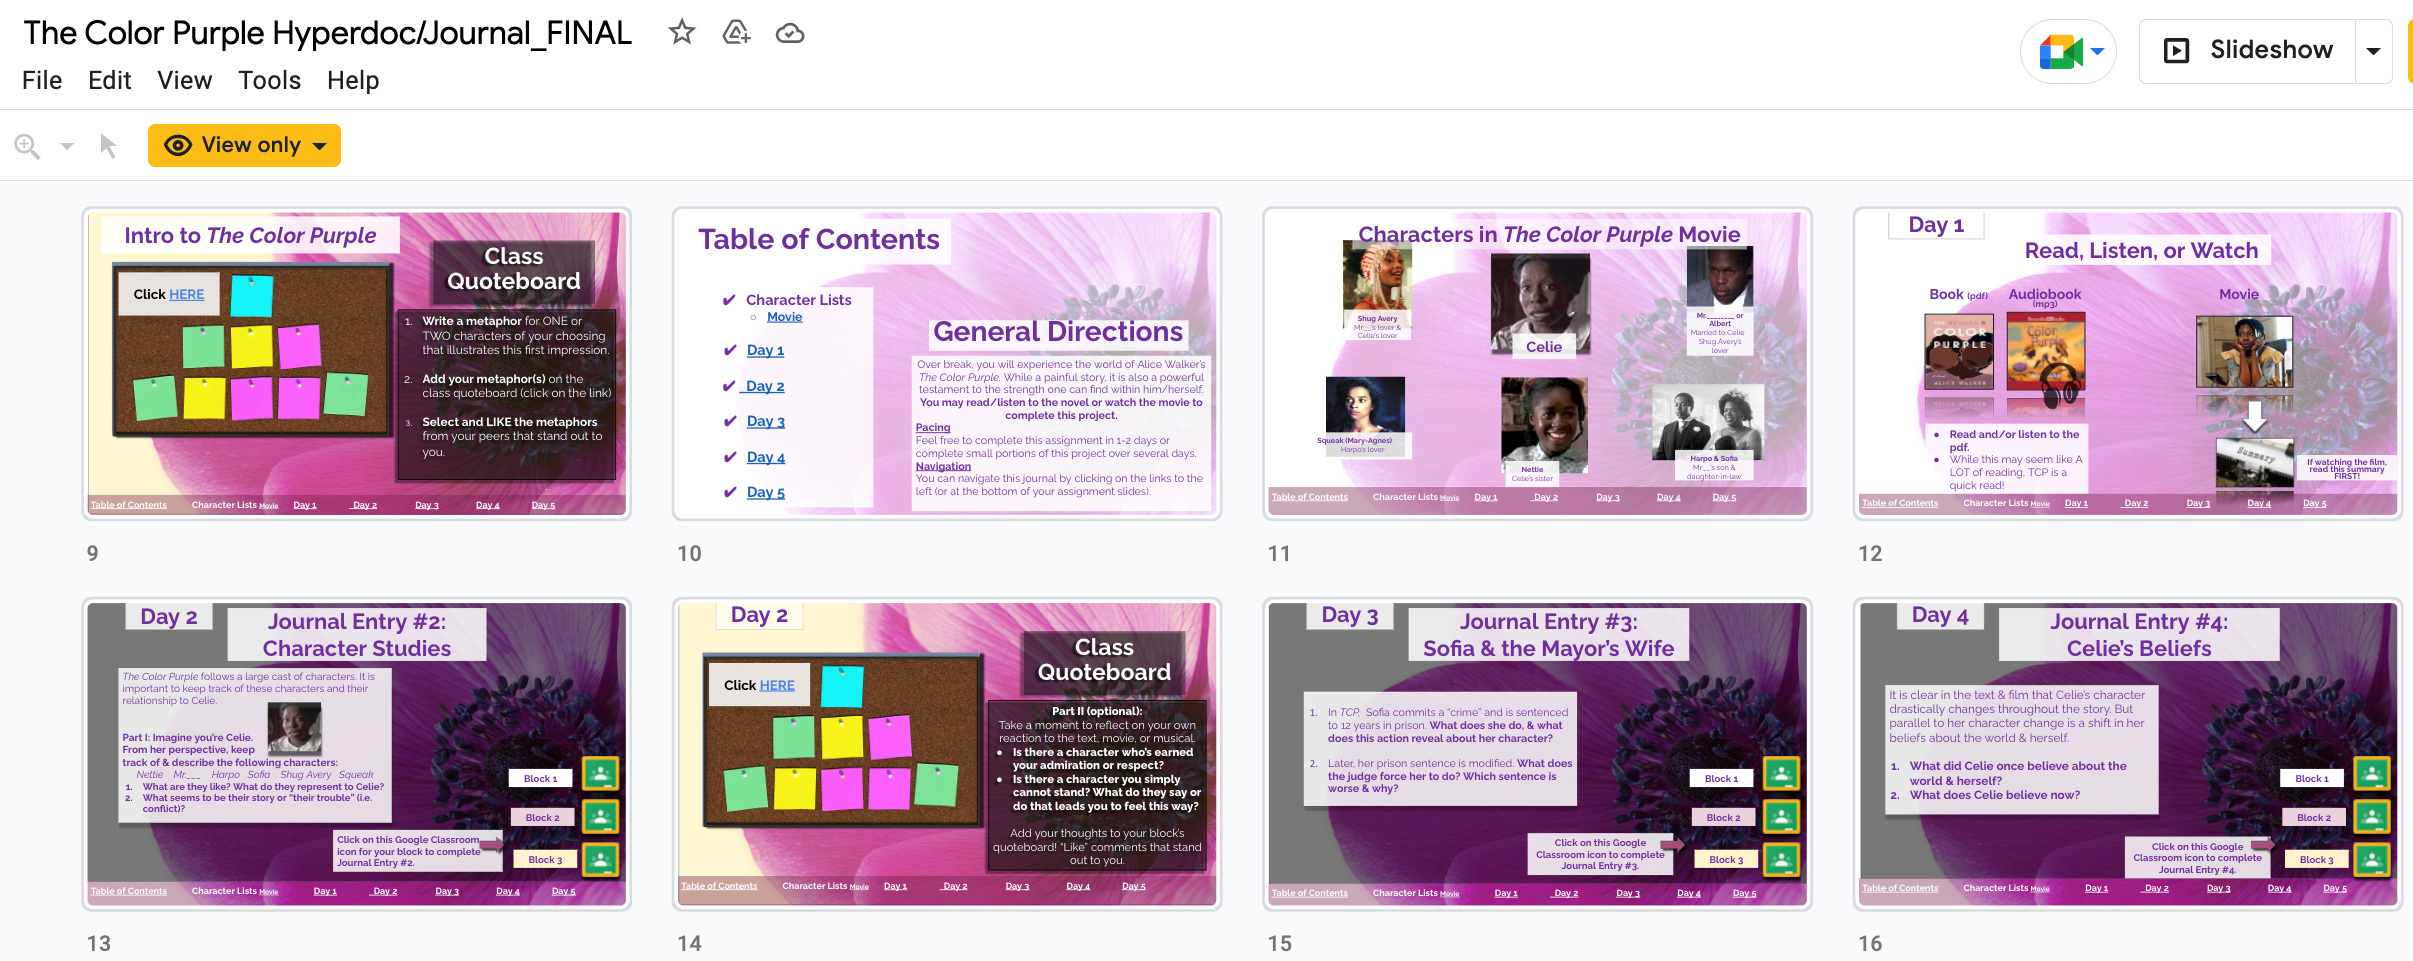 Screenshot of slides from The Color Purple HyperDoc